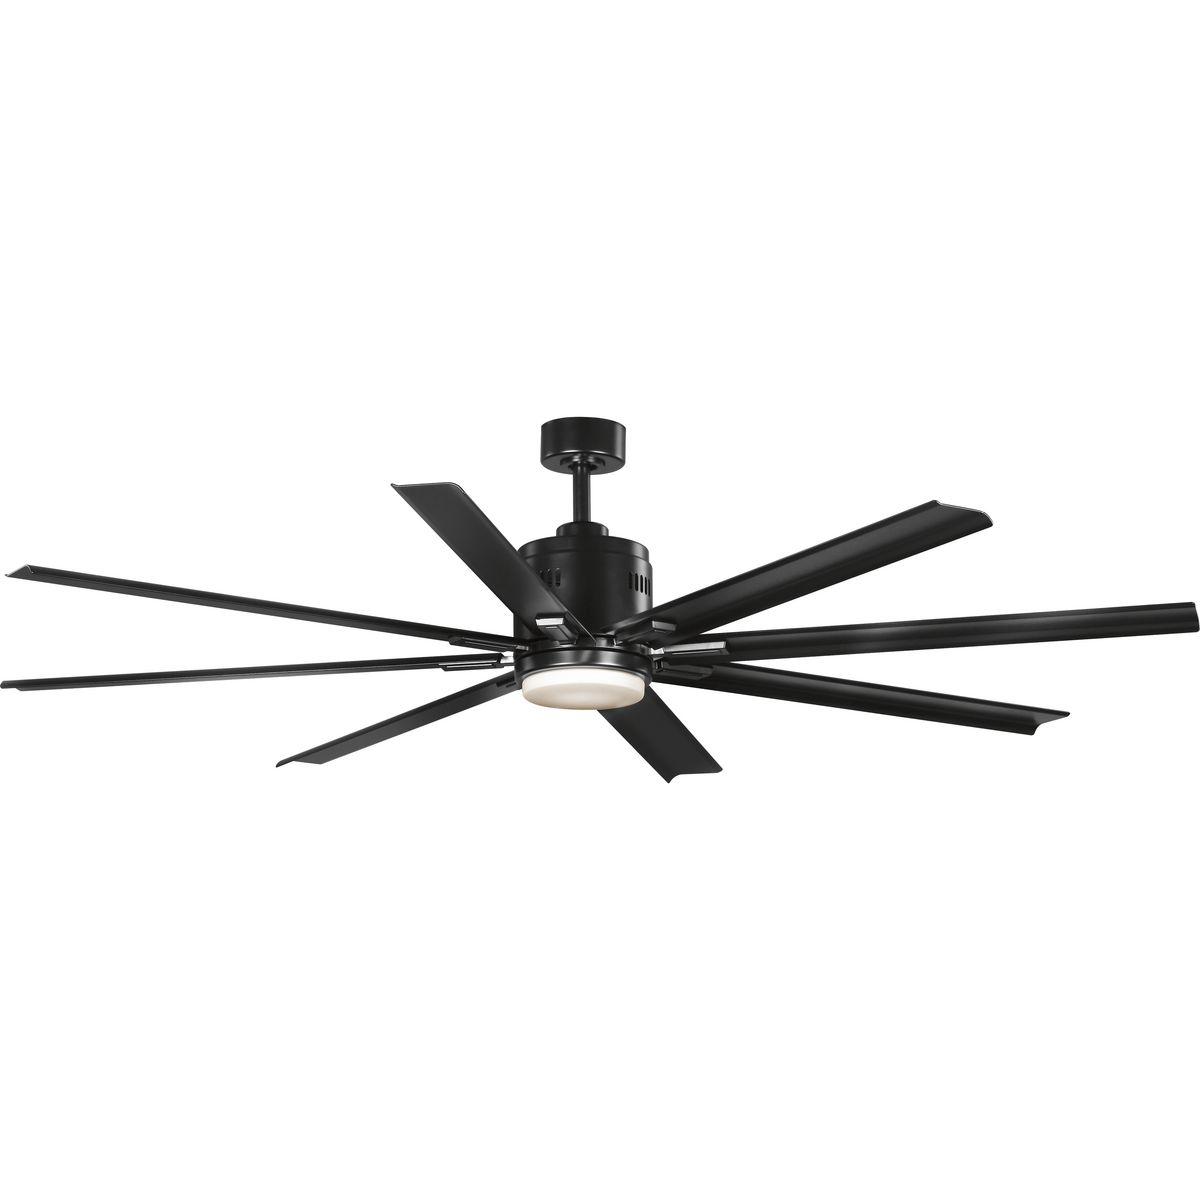 Hubbell P2550-3130K Enjoy spending a comfortable evening in your favorite large living area as you are kept cool by a beautiful and expansive Vast ceiling fan. A refreshing airflow cascades down from the fan's Black blades that are complemented by the handsome Black finish. 